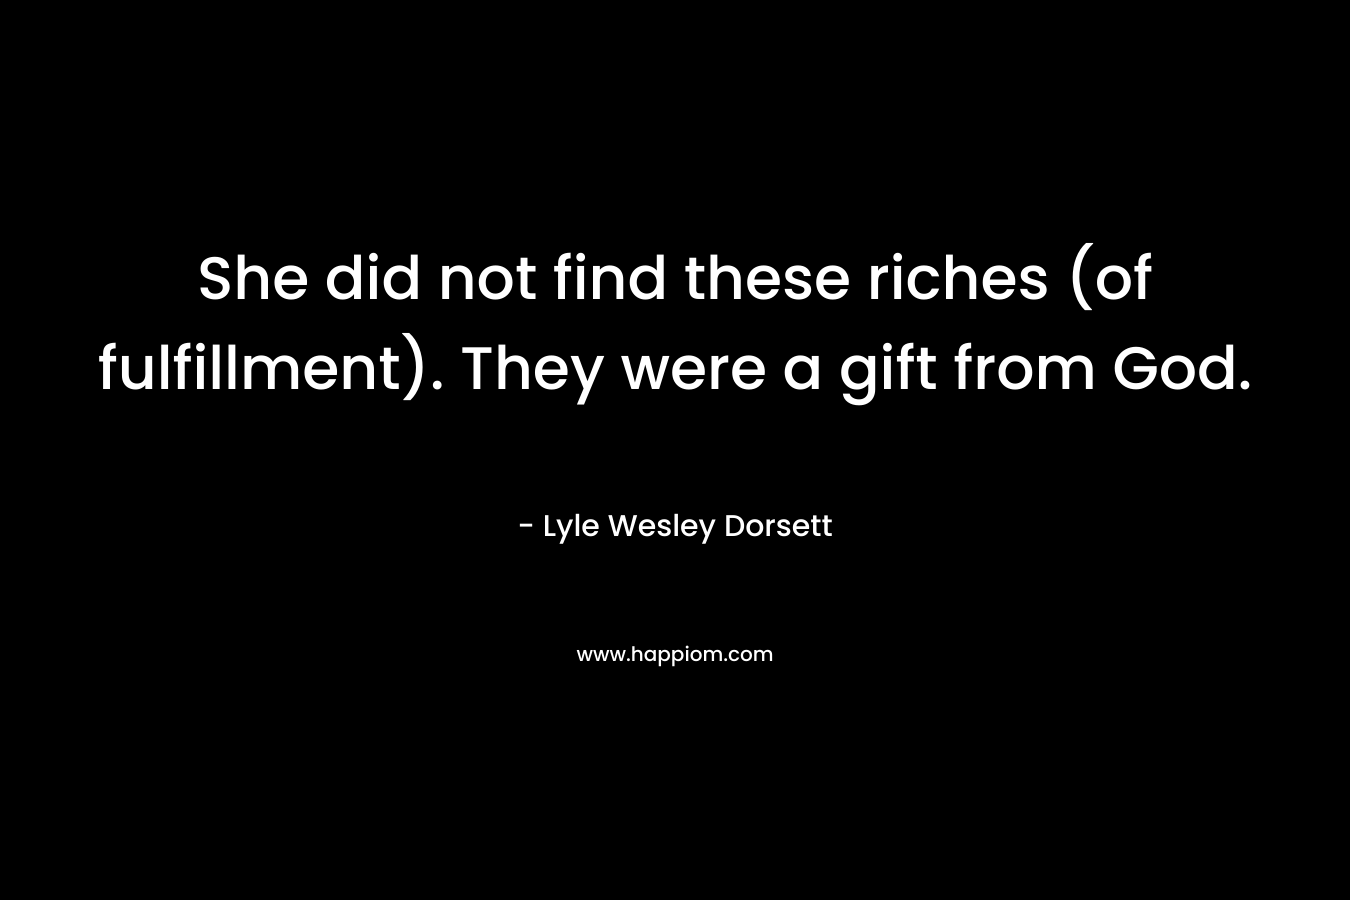 She did not find these riches (of fulfillment). They were a gift from God.